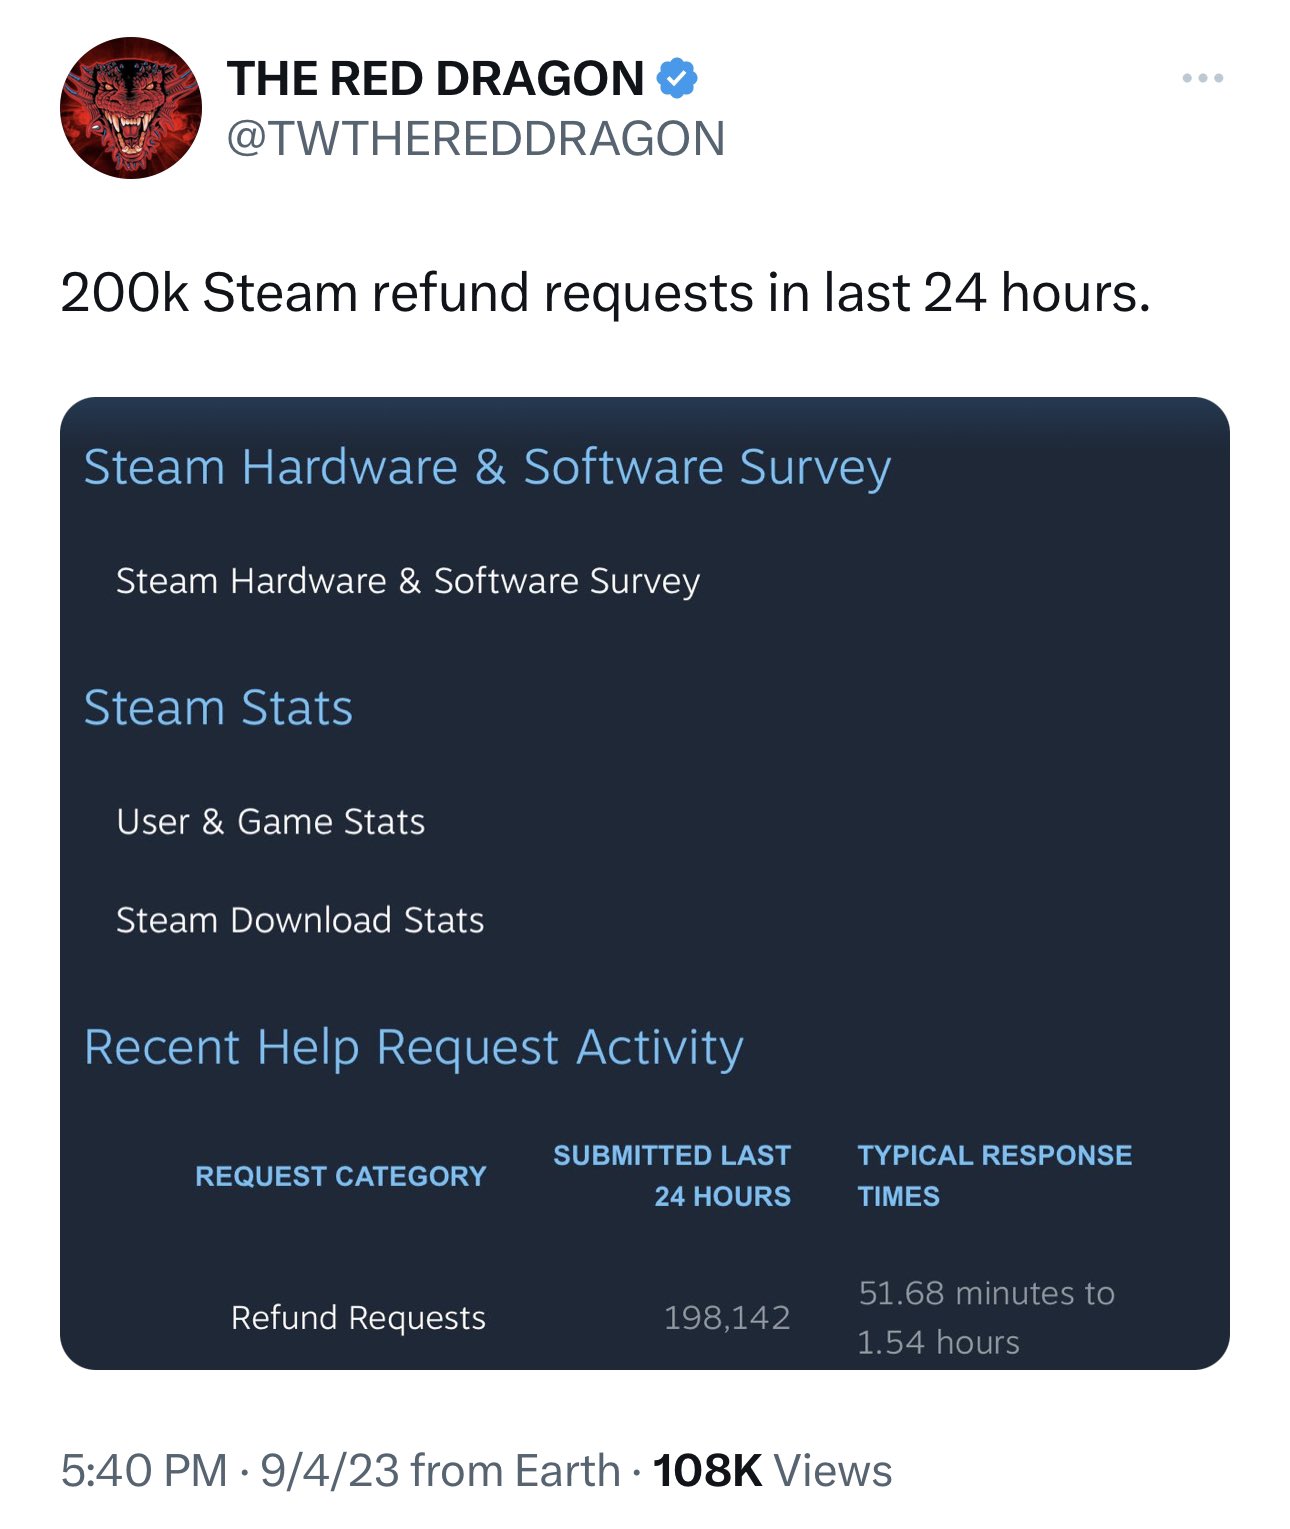 Steam Support :: How To Request A Refund